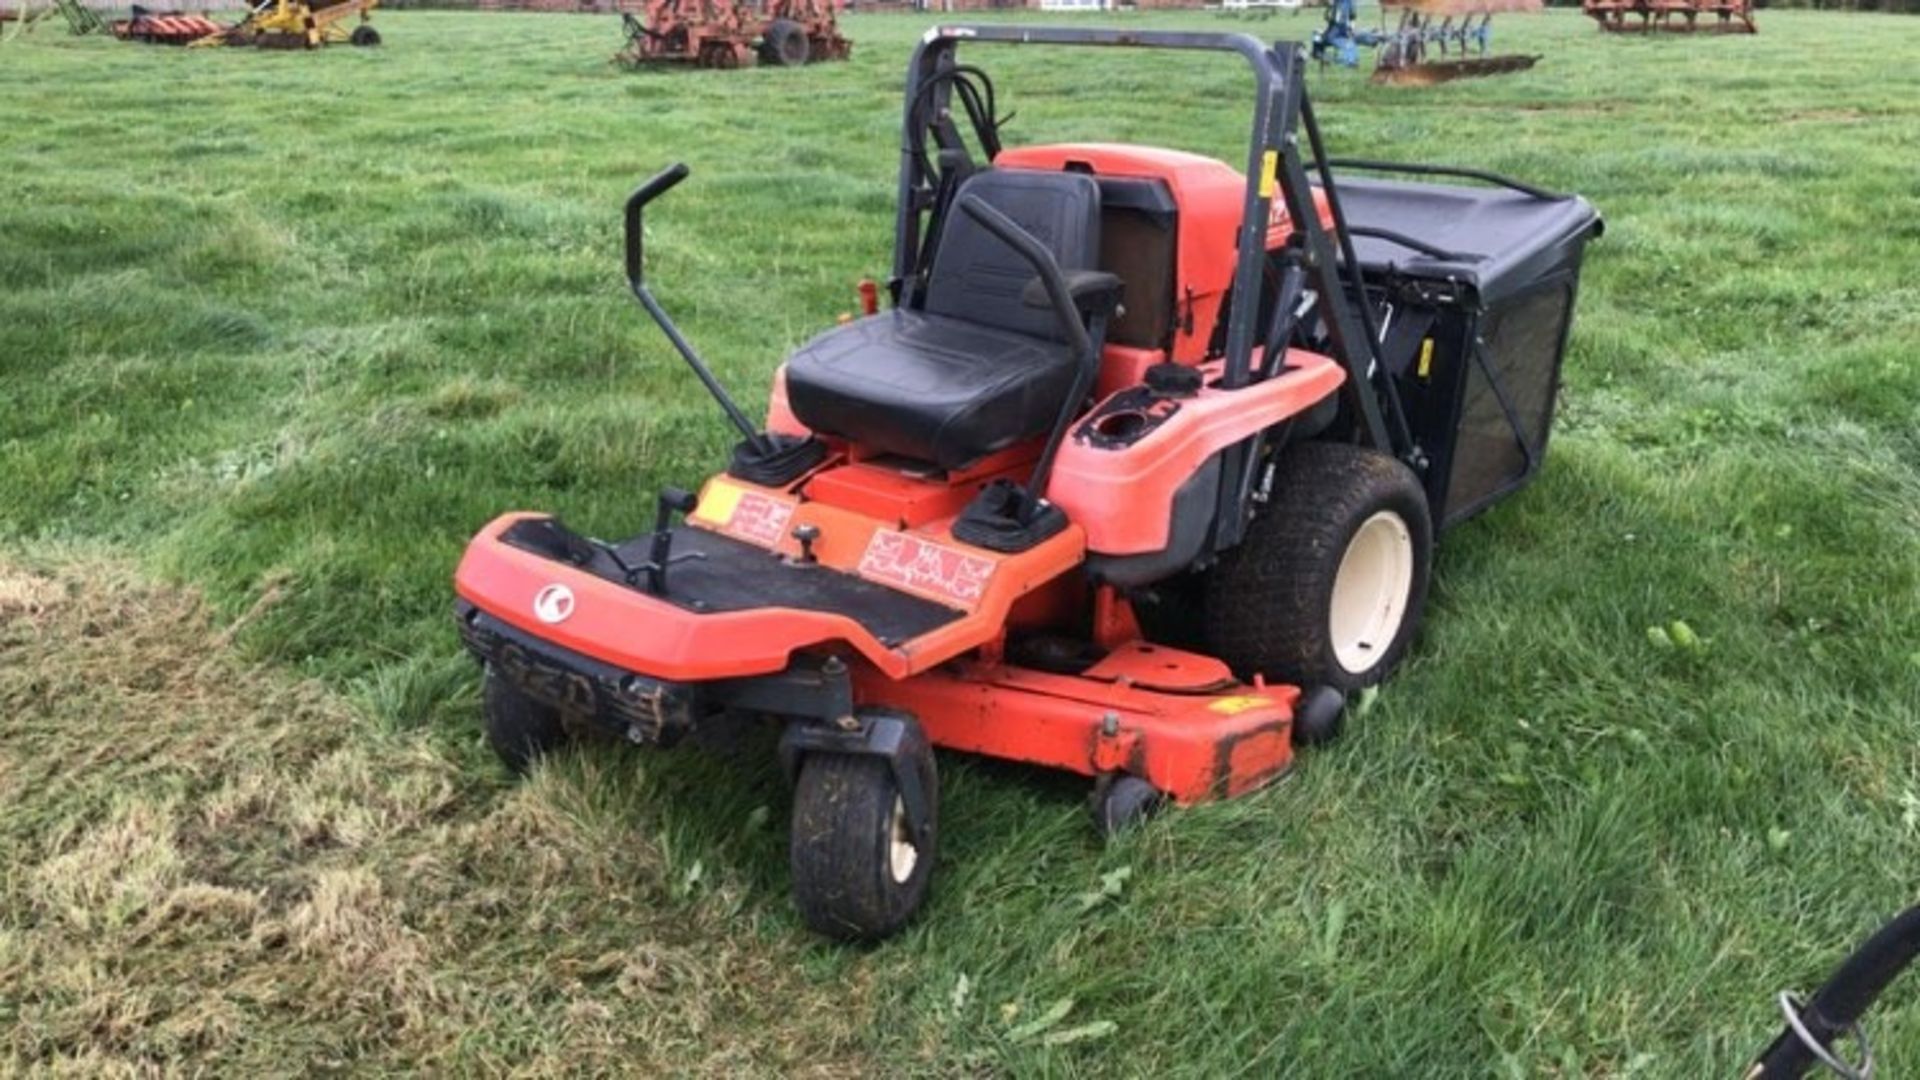 Kubota GZD21 GHDE Cut and Zero Turn Mower with High Tip Collector 4269 hours - Image 2 of 2